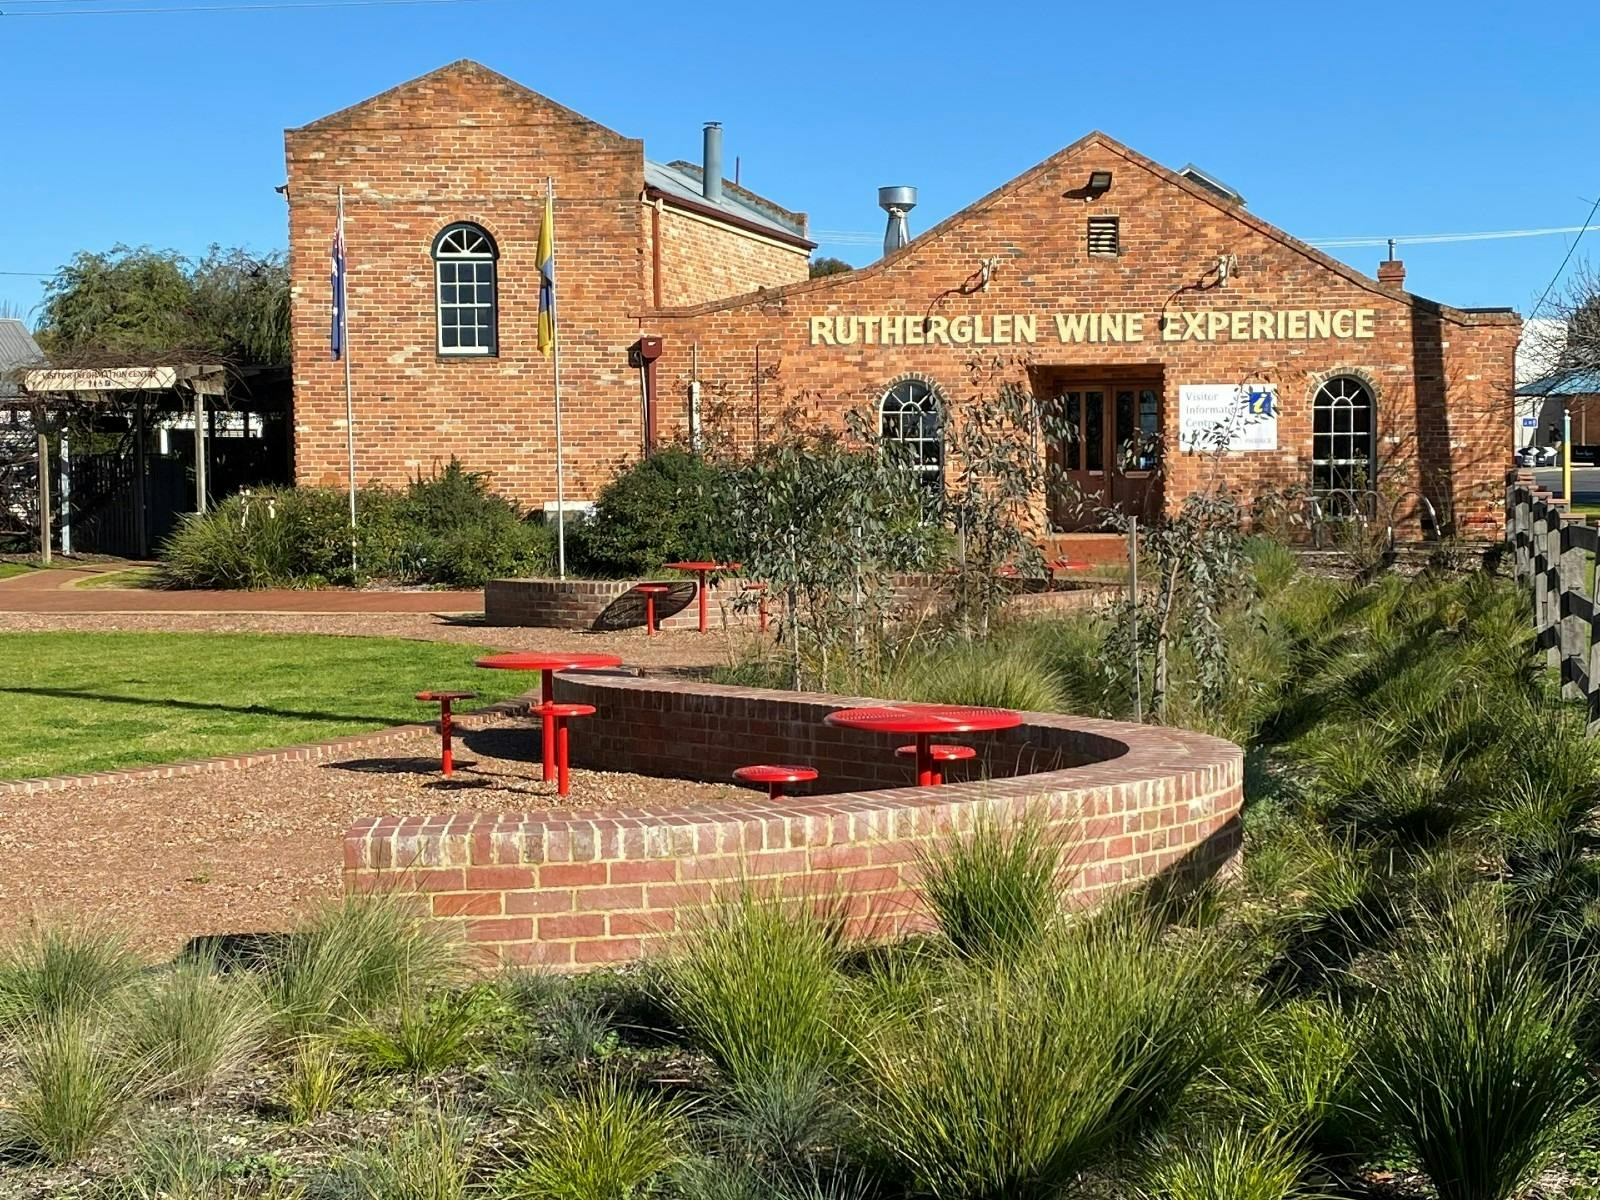 BYO picnic with these outdoor dining options